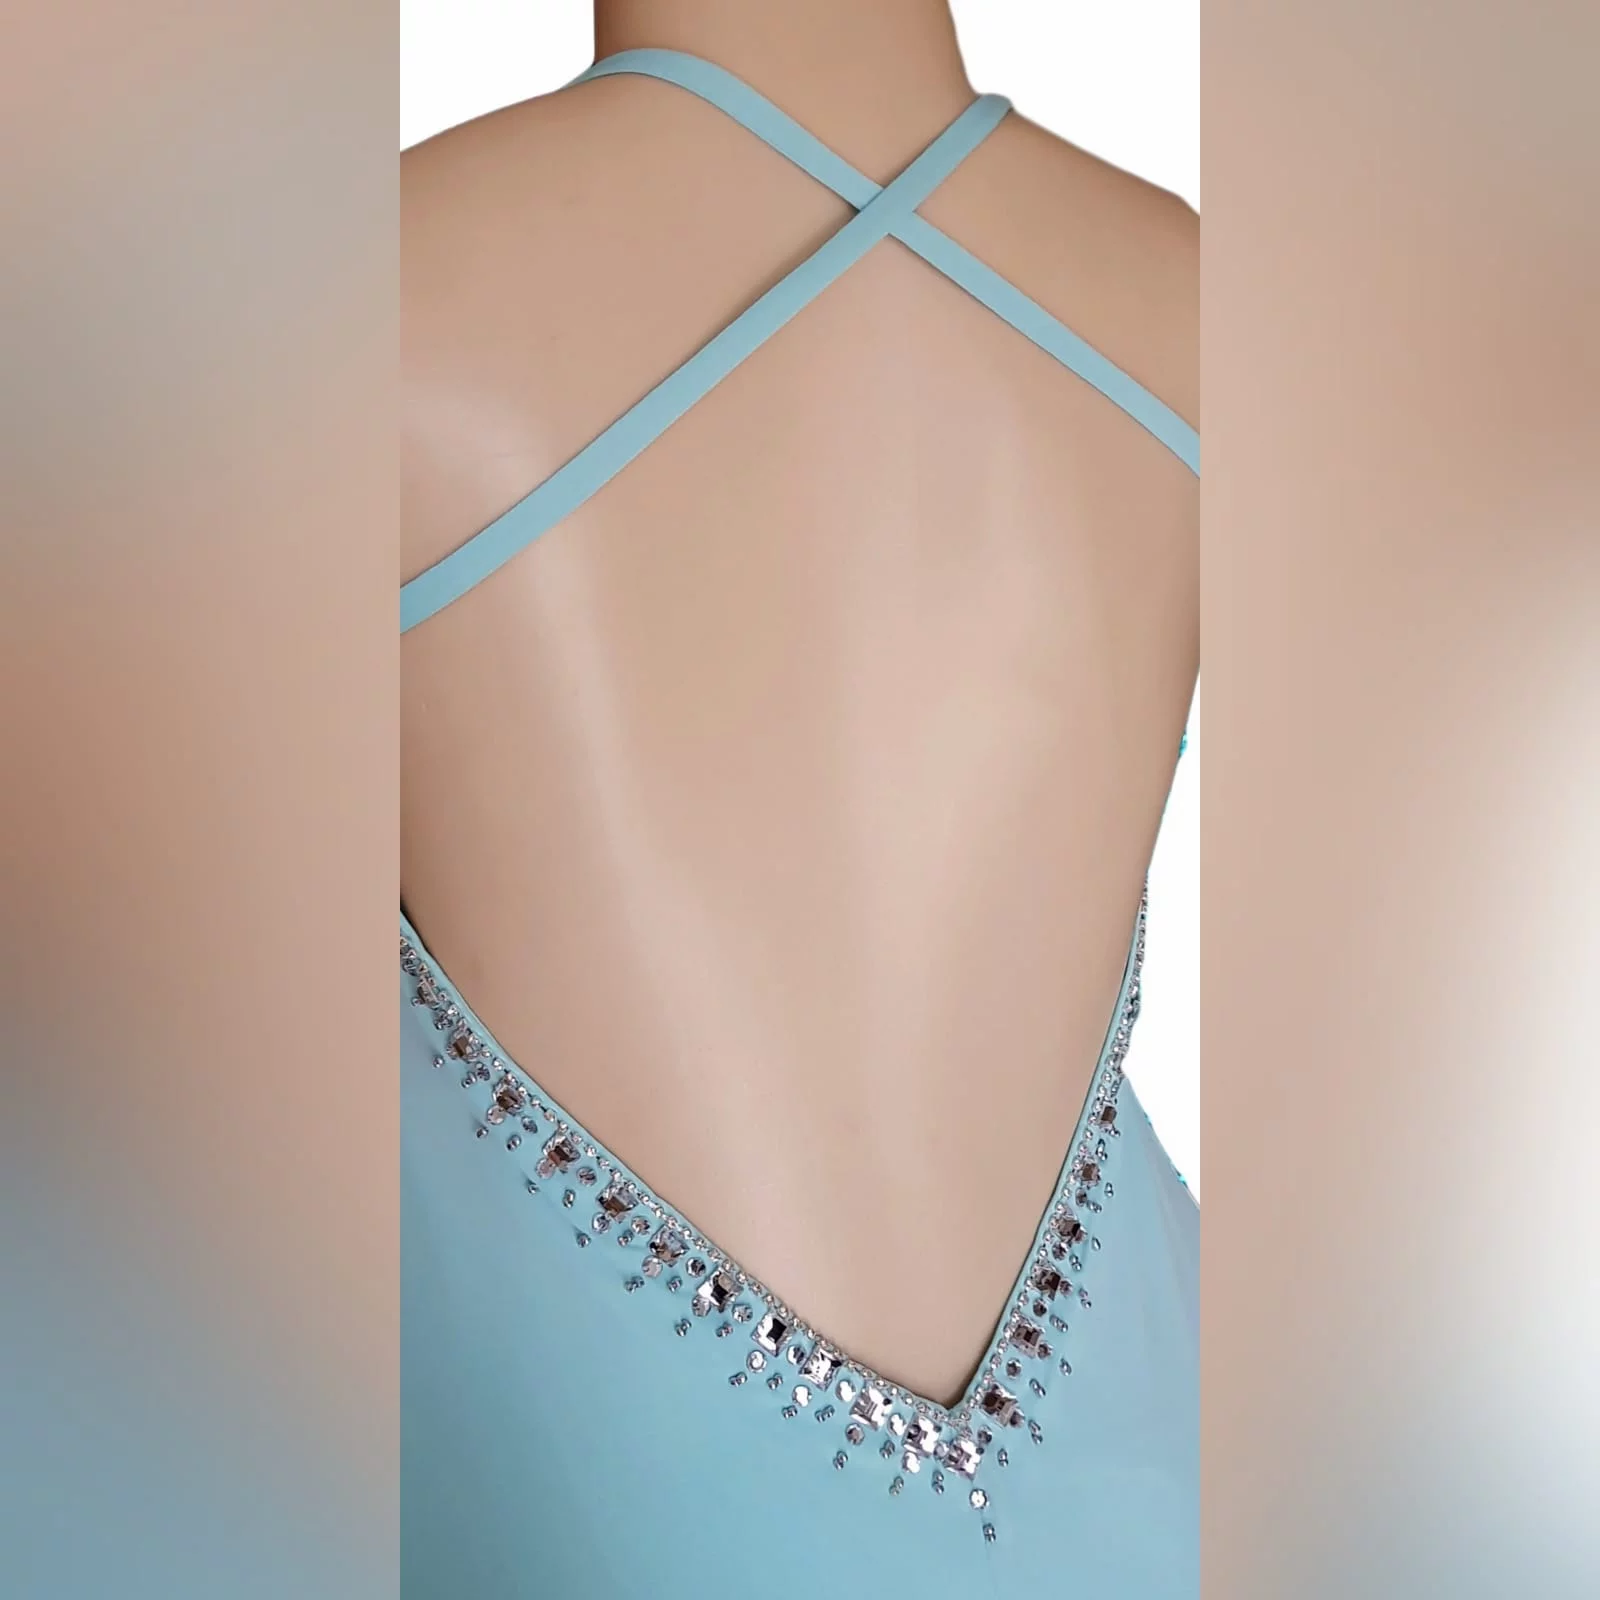 Aqua blue and silver prom dress 4 aqua blue and silver prom dress with a rounded neckline, open low v back with thin crossed straps, slit and a train. Dress detailed with silver beads and stones.